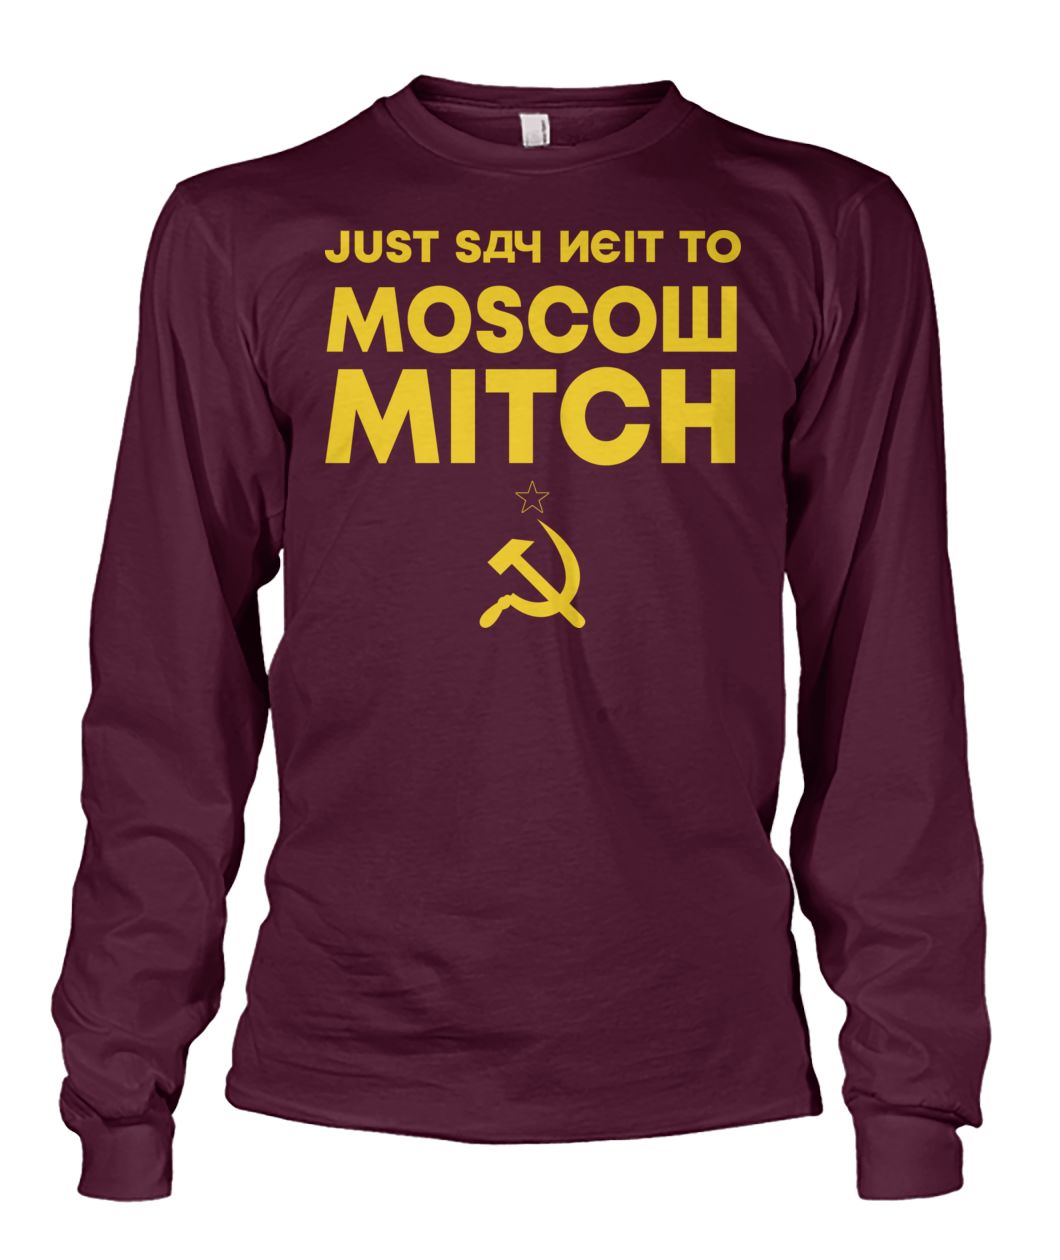 Just say neit to moscow mitch unisex long sleeve